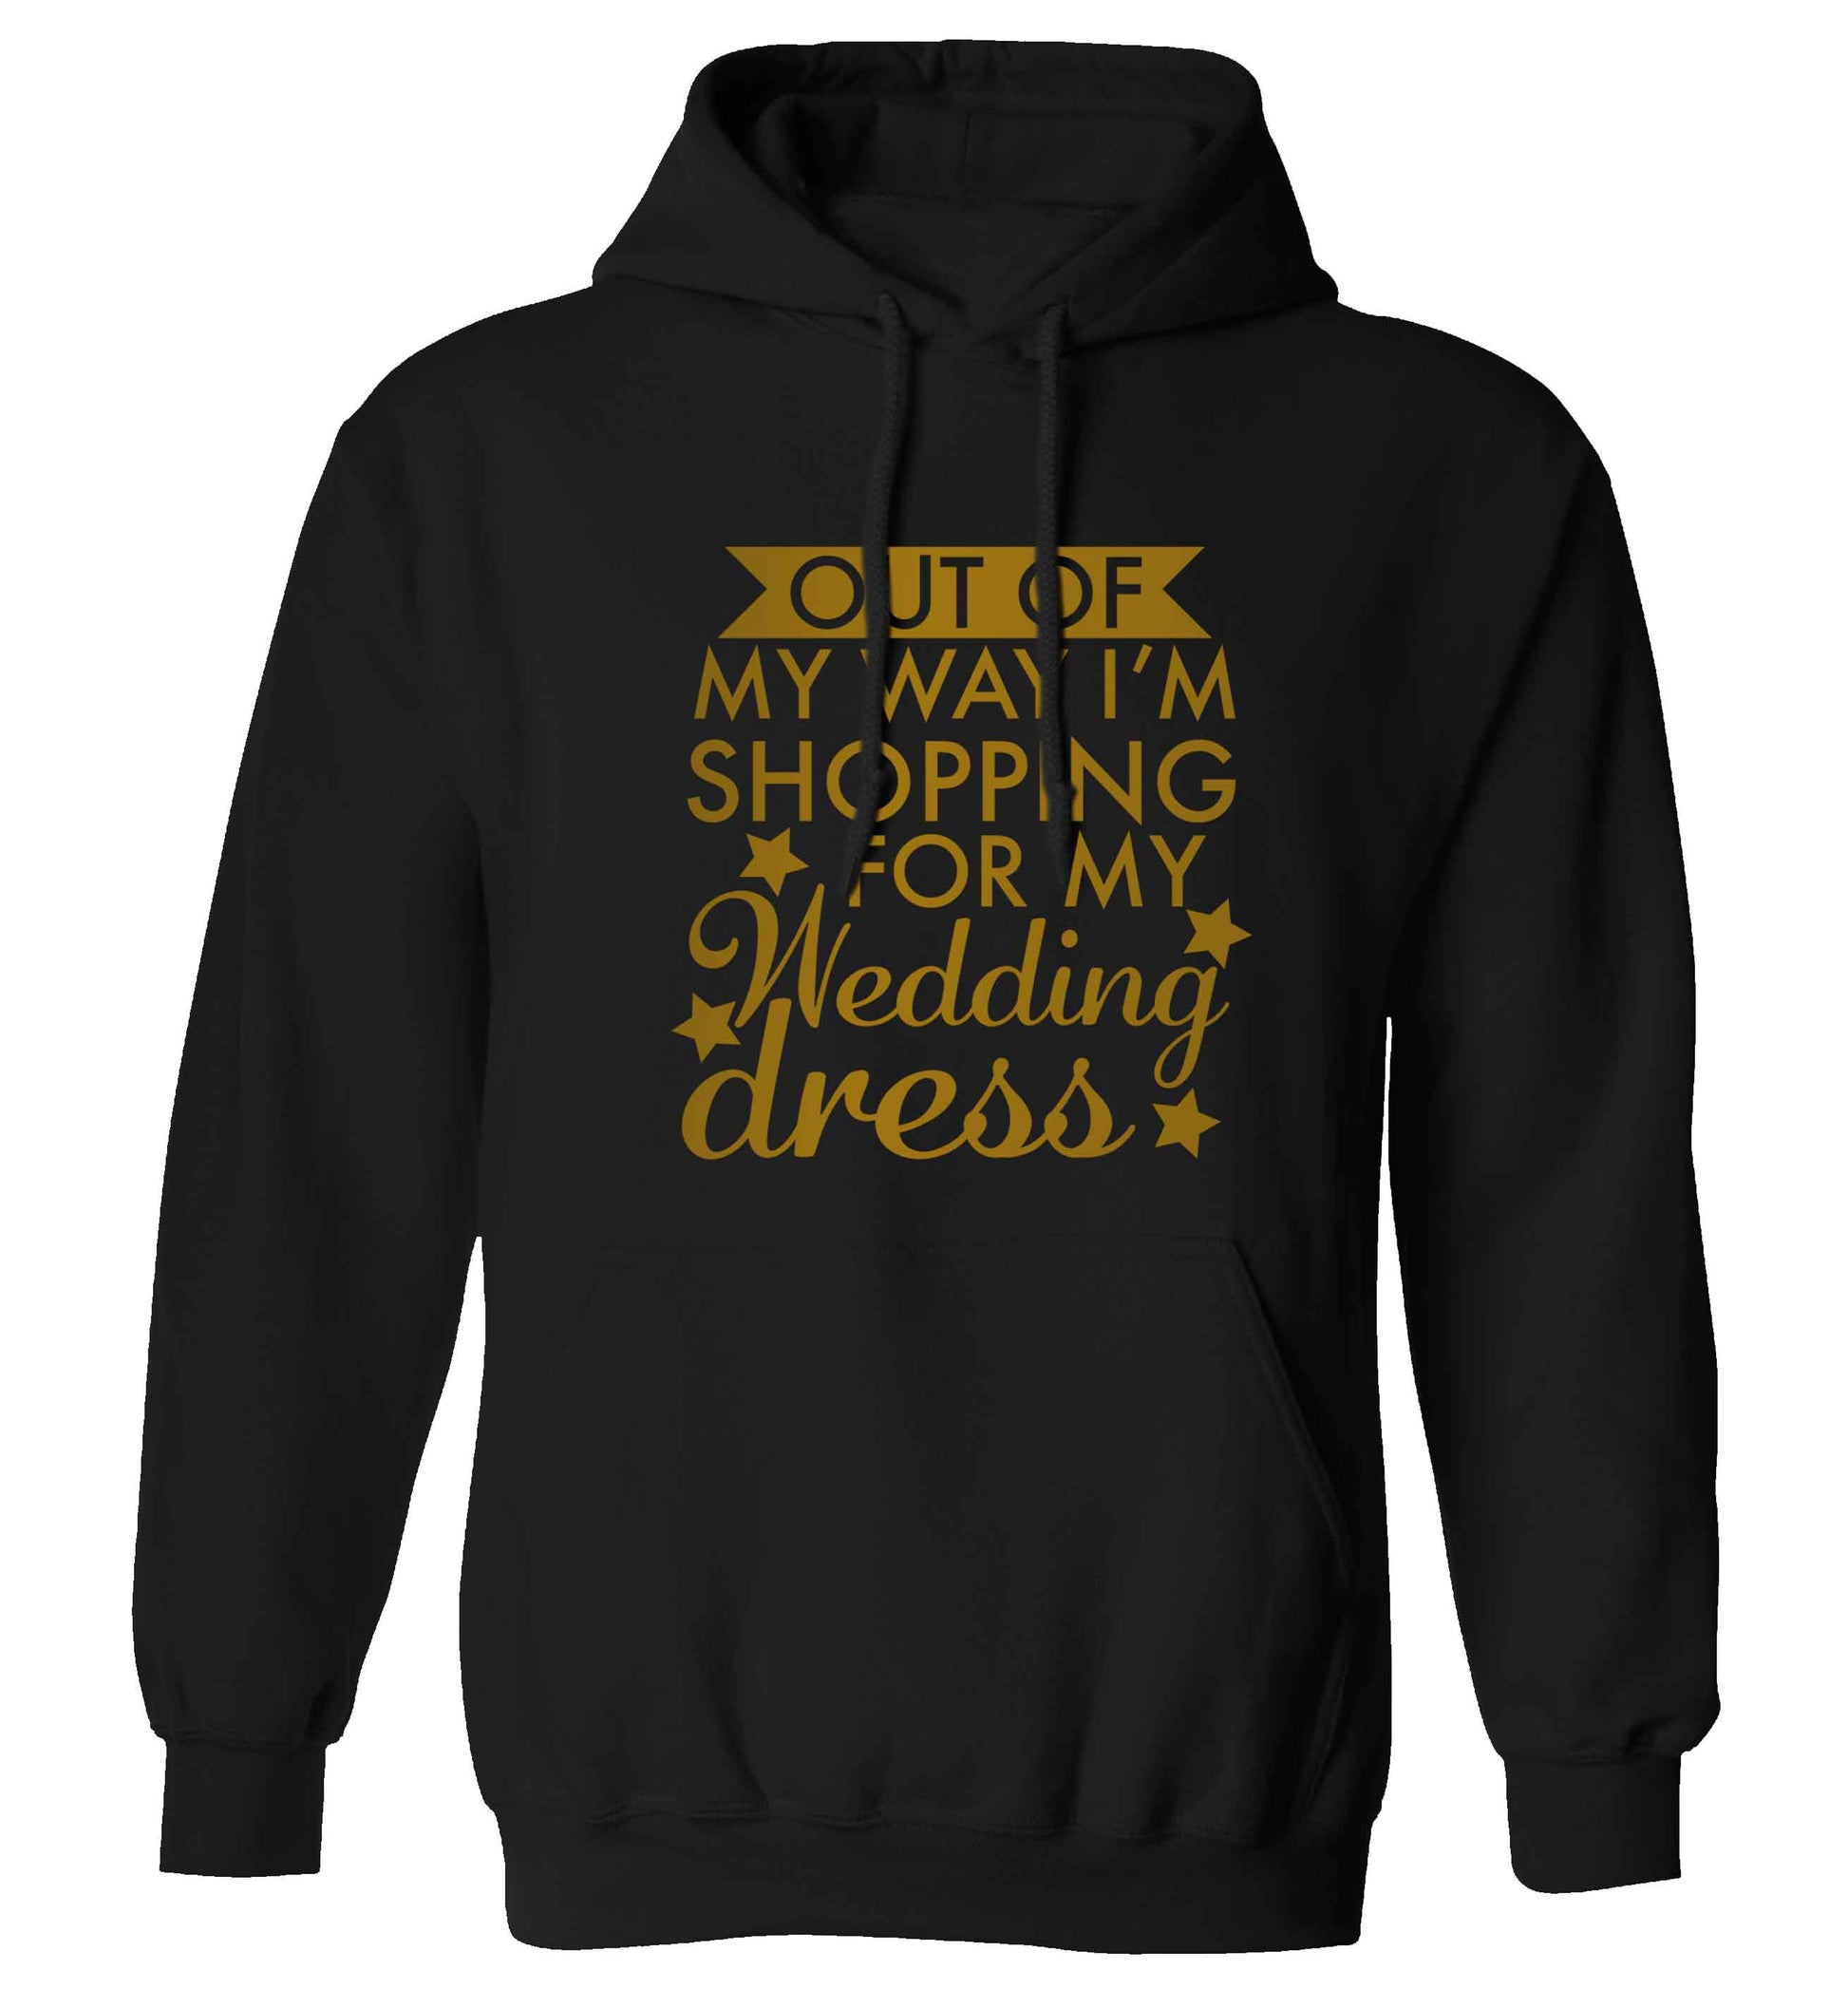 Out of my way I'm shopping for my wedding dress adults unisex black hoodie 2XL